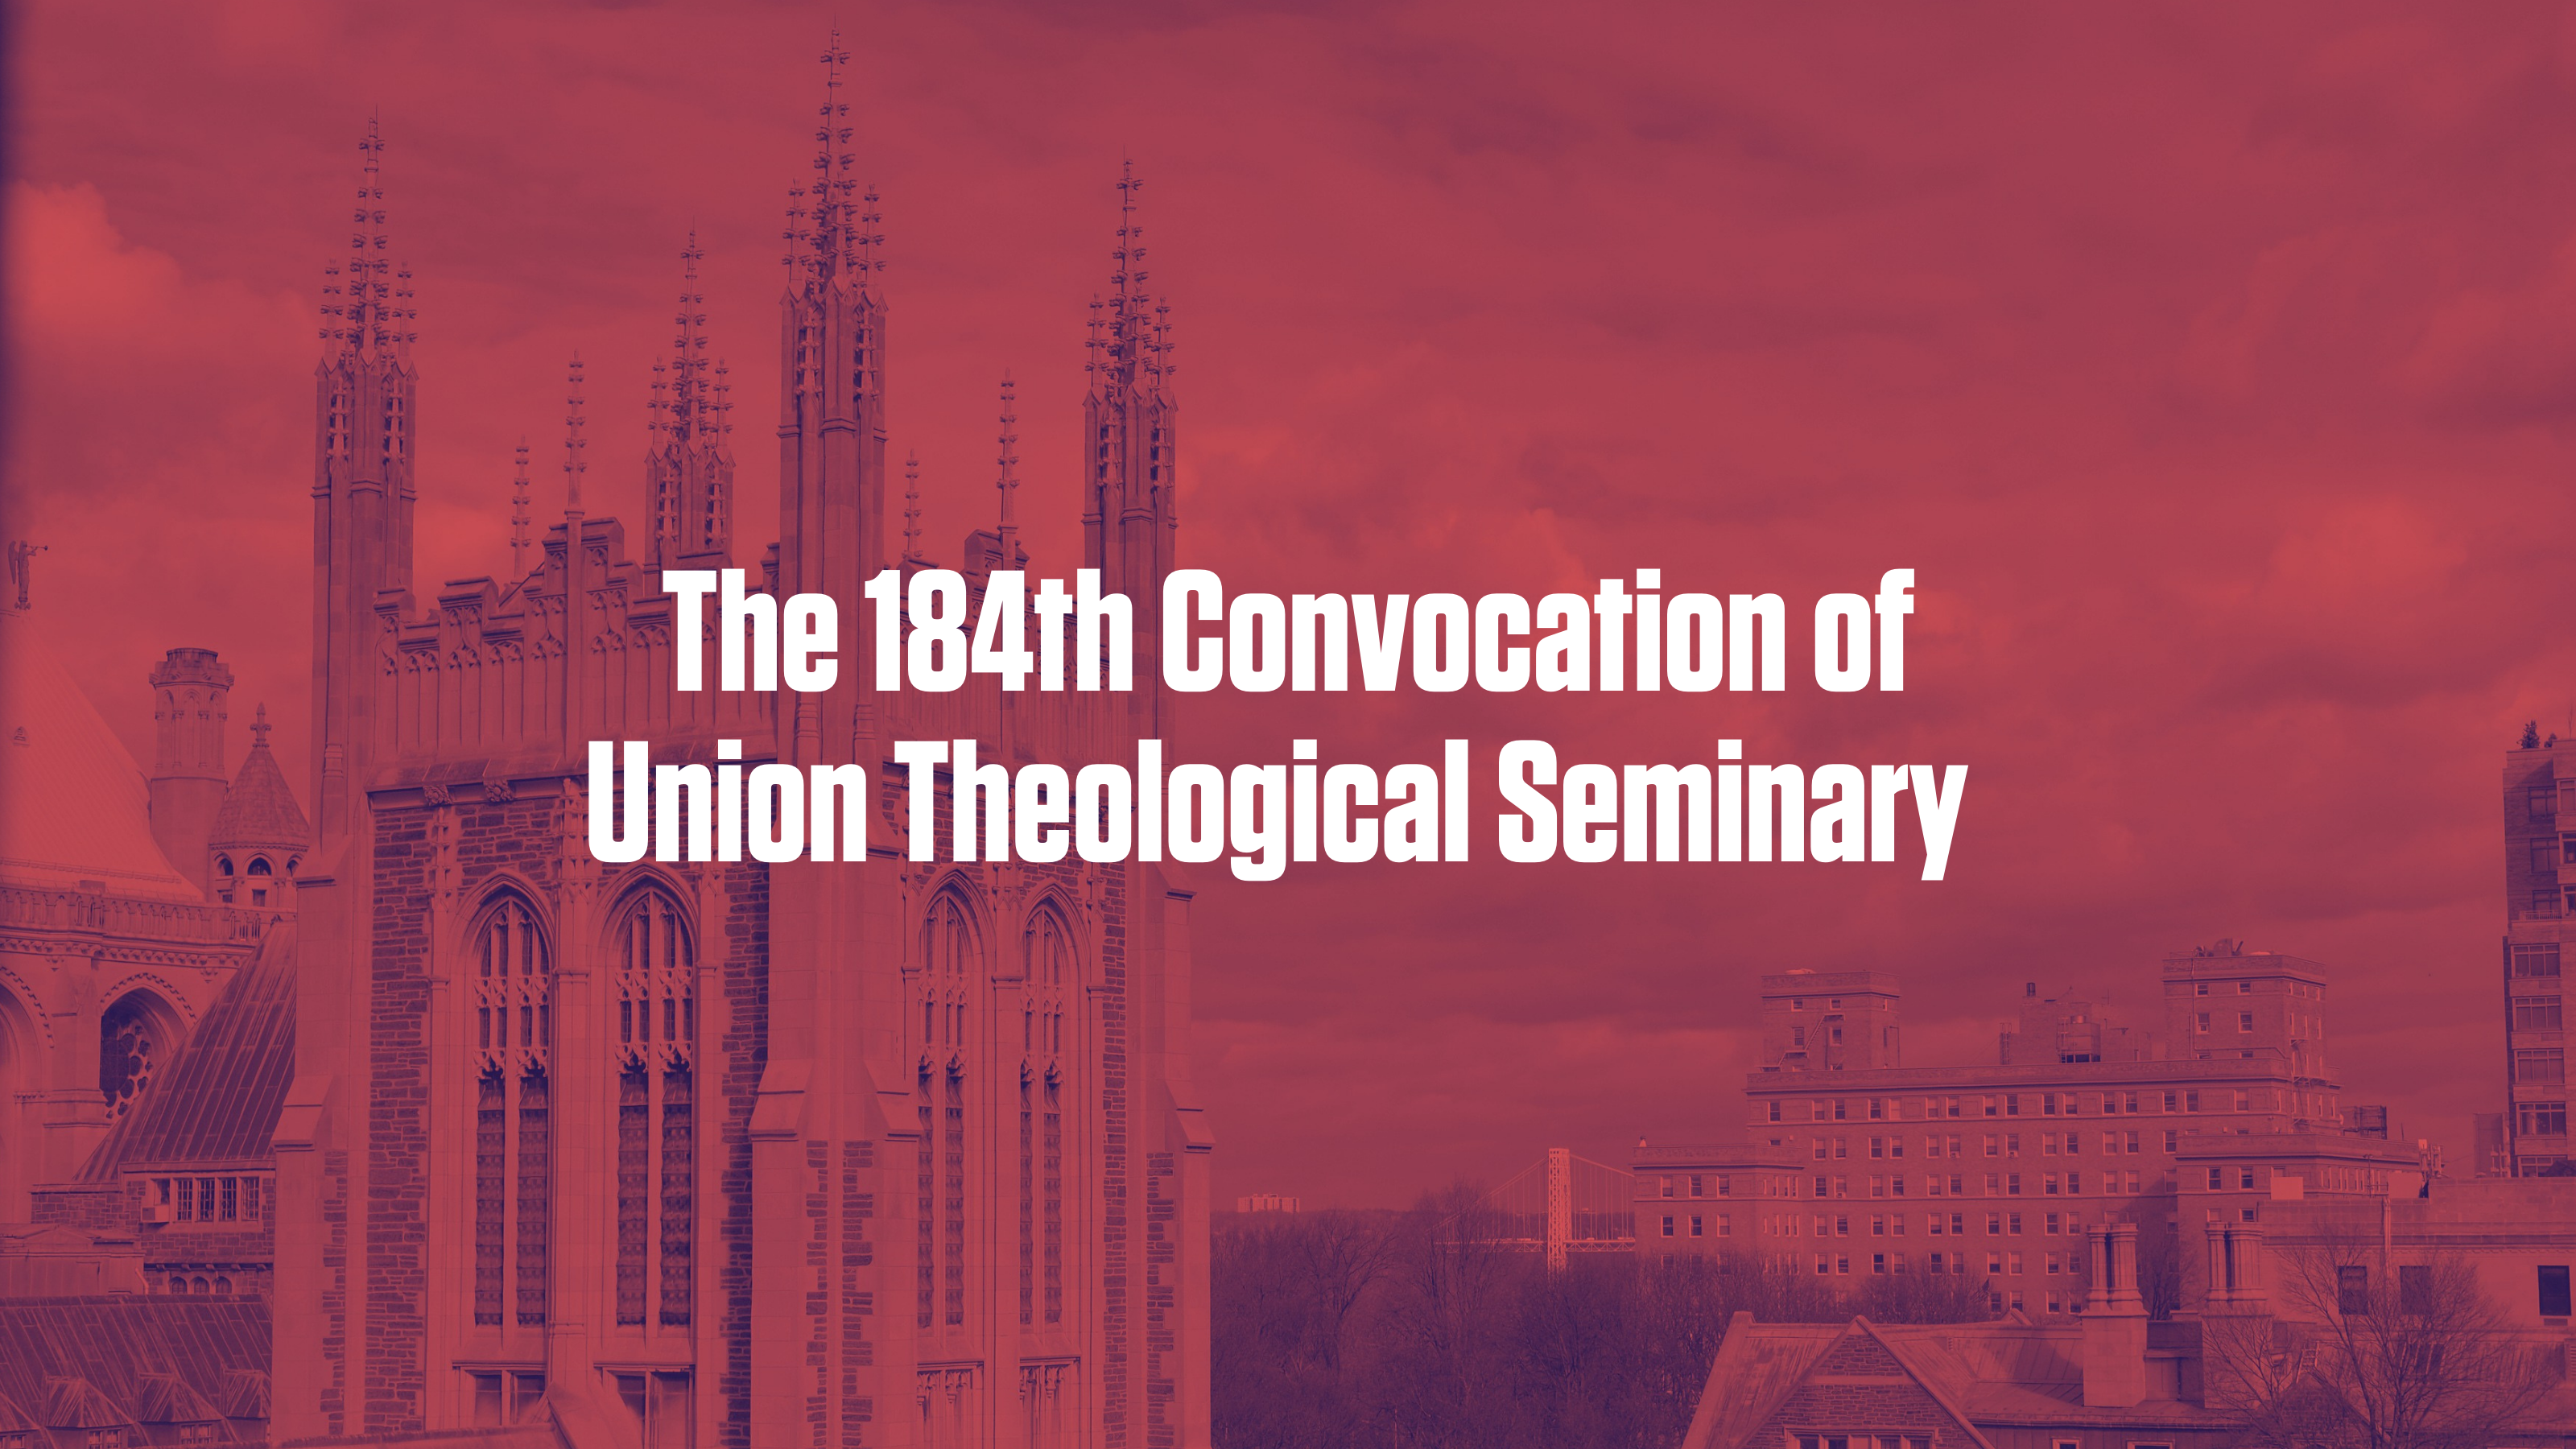 The 184th Convocation of Union Theological Seminary